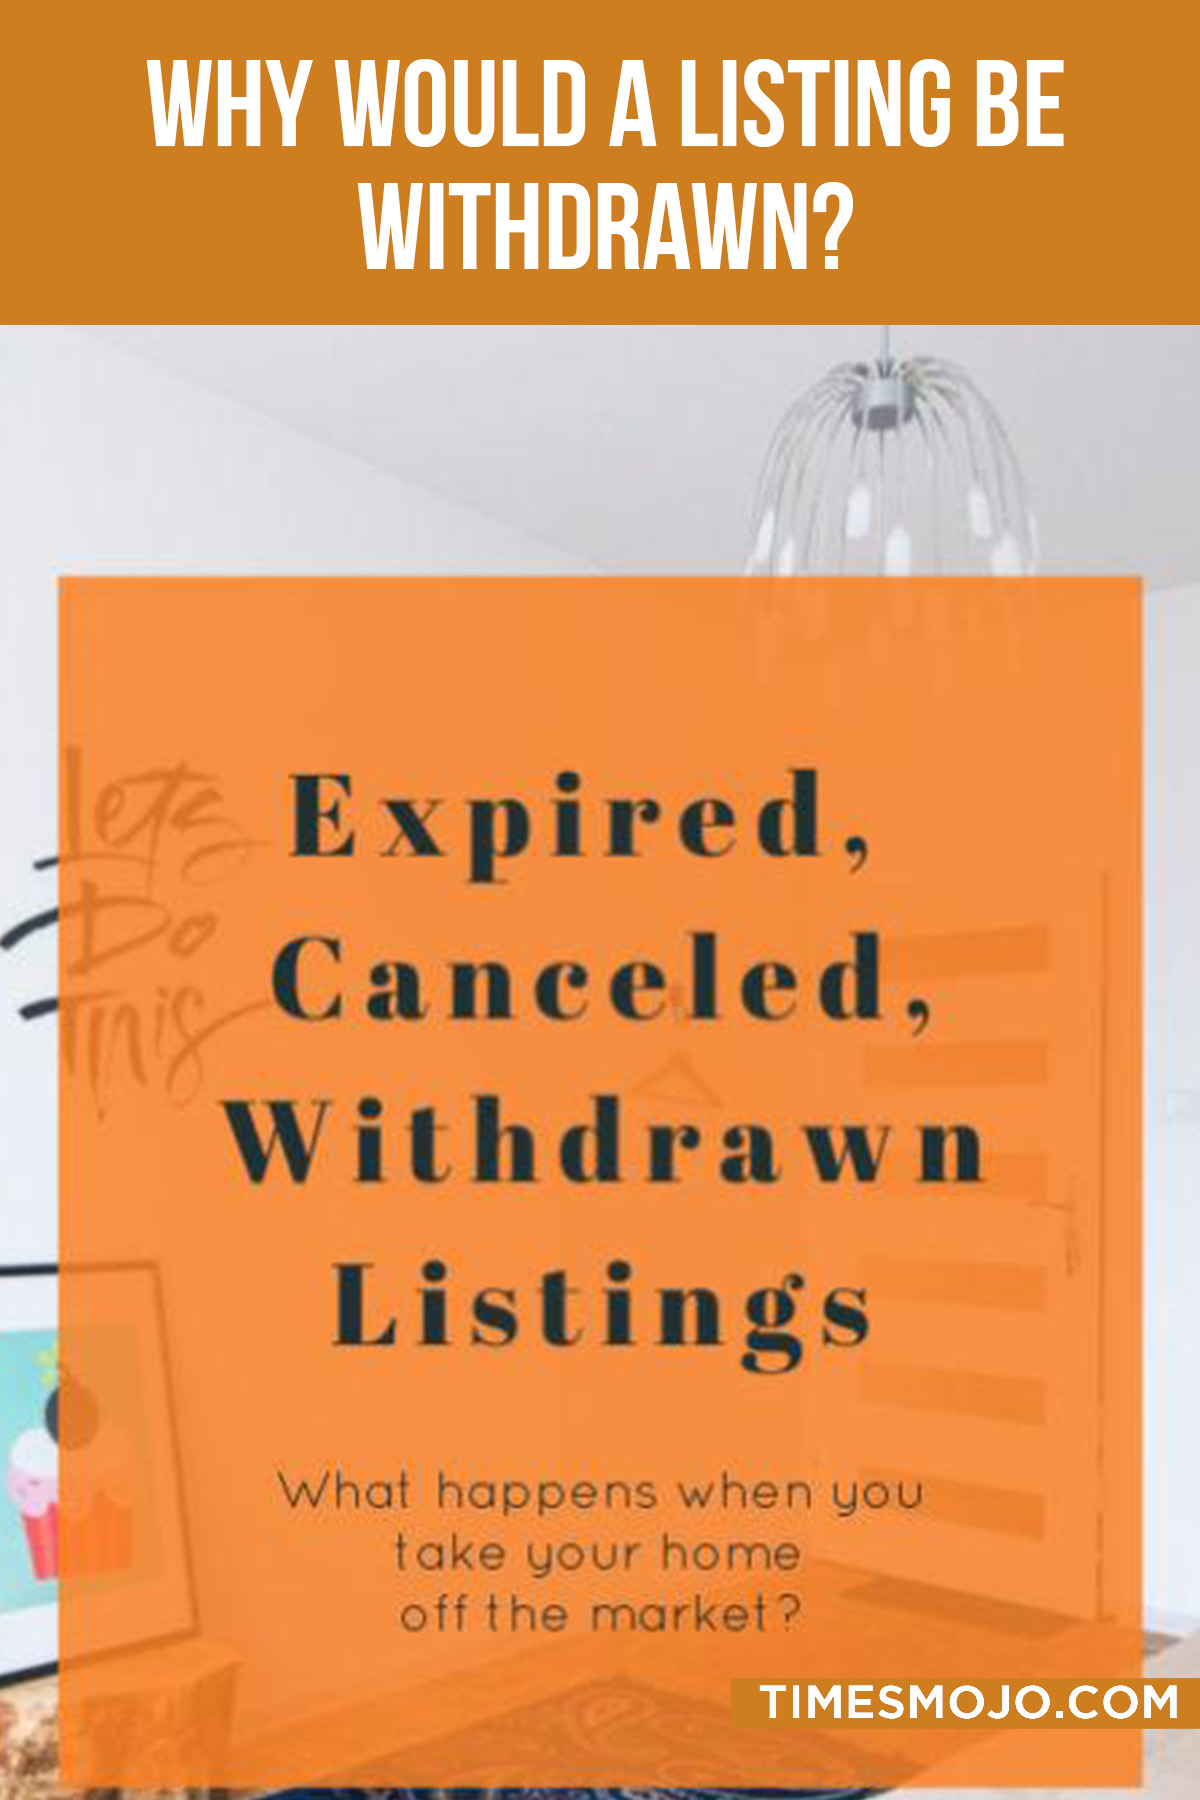 Why would a listing be withdrawn? TimesMojo